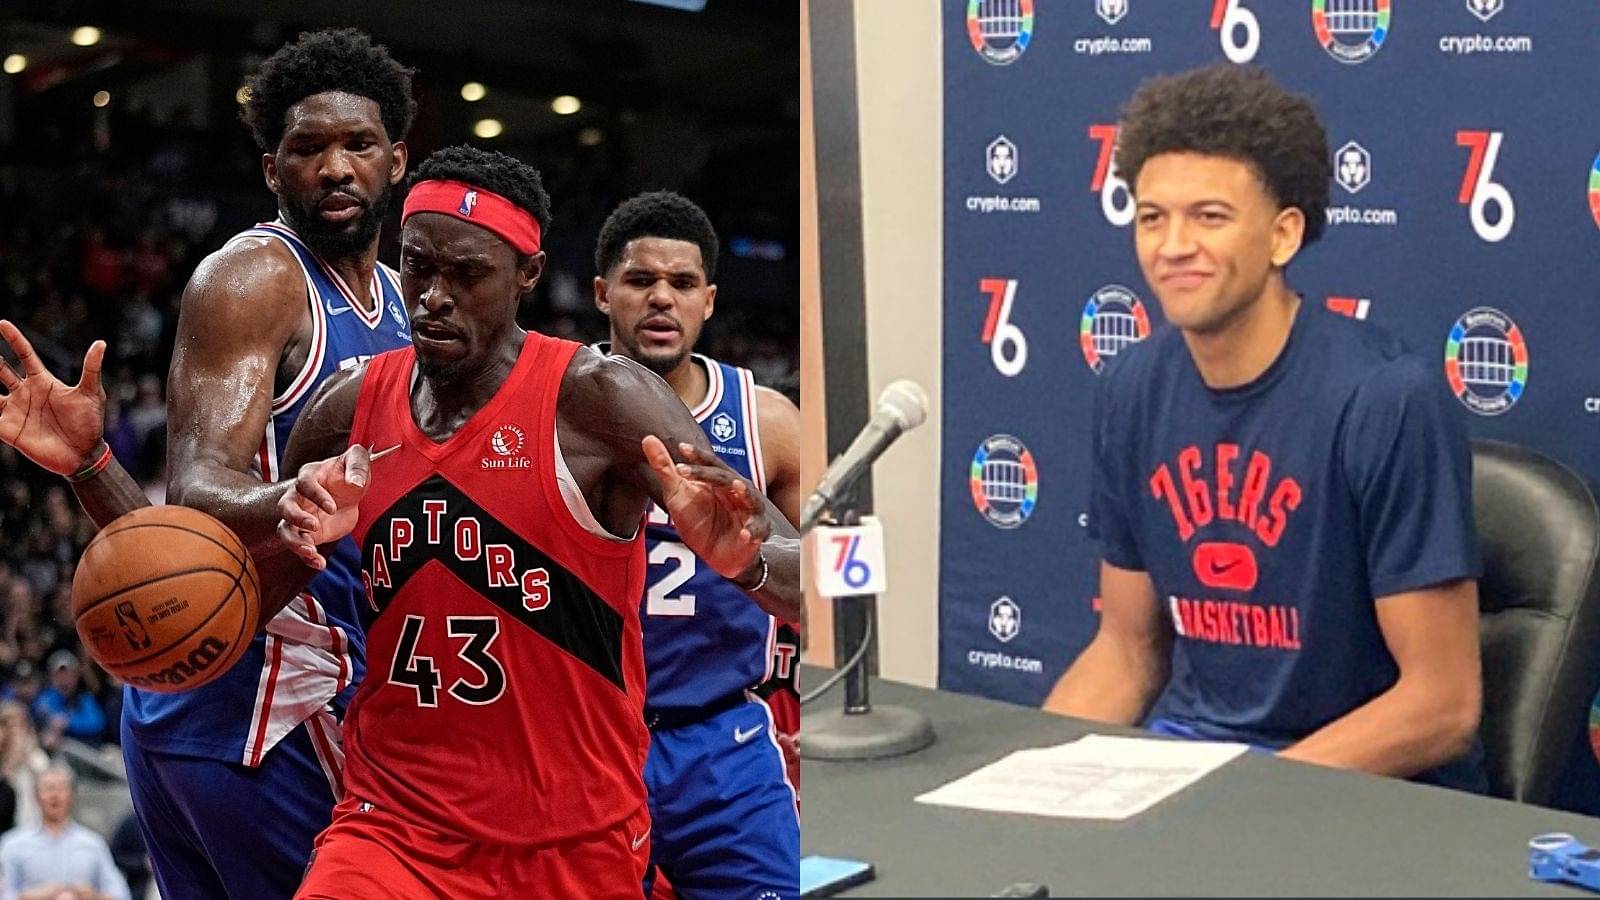 "Playoffs, reputation, and future earnings!? Everything is second to health!": Matisse Thybulle believes in 'holistic household' approach, even if it means missing Sixers' playoffs games